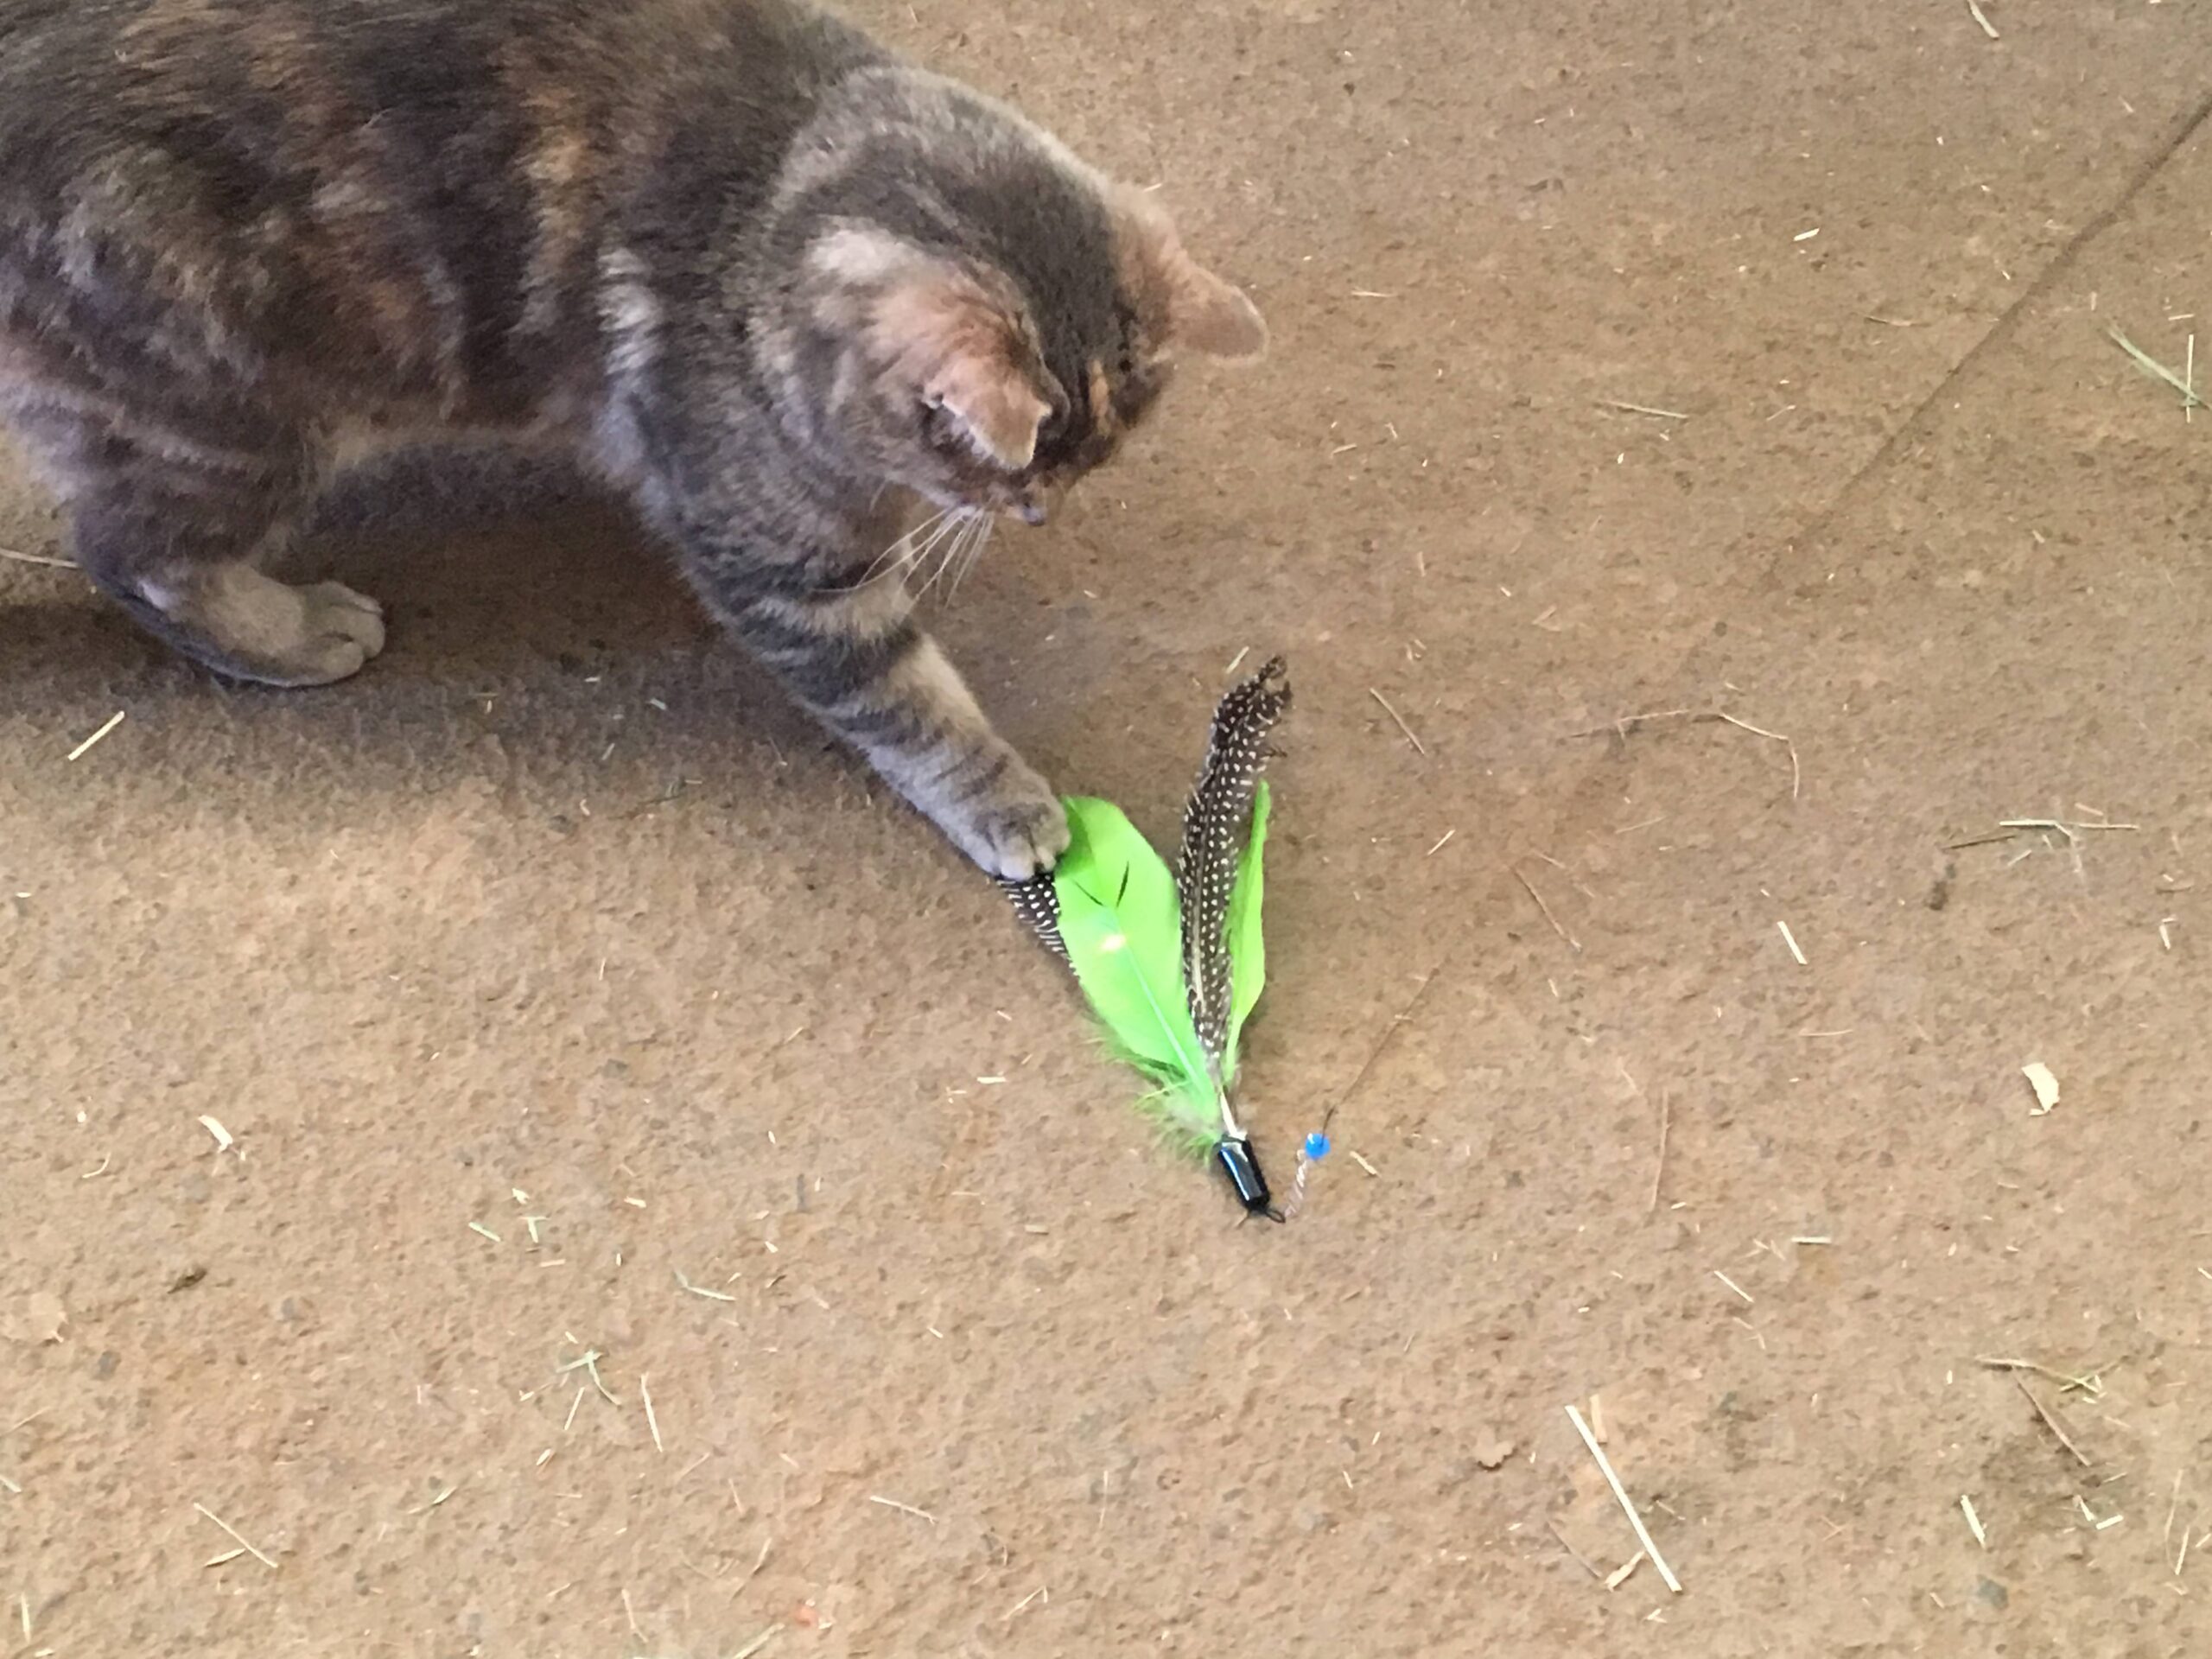 Product Review: Check Out The New Jackson Galaxy Cat Toys!